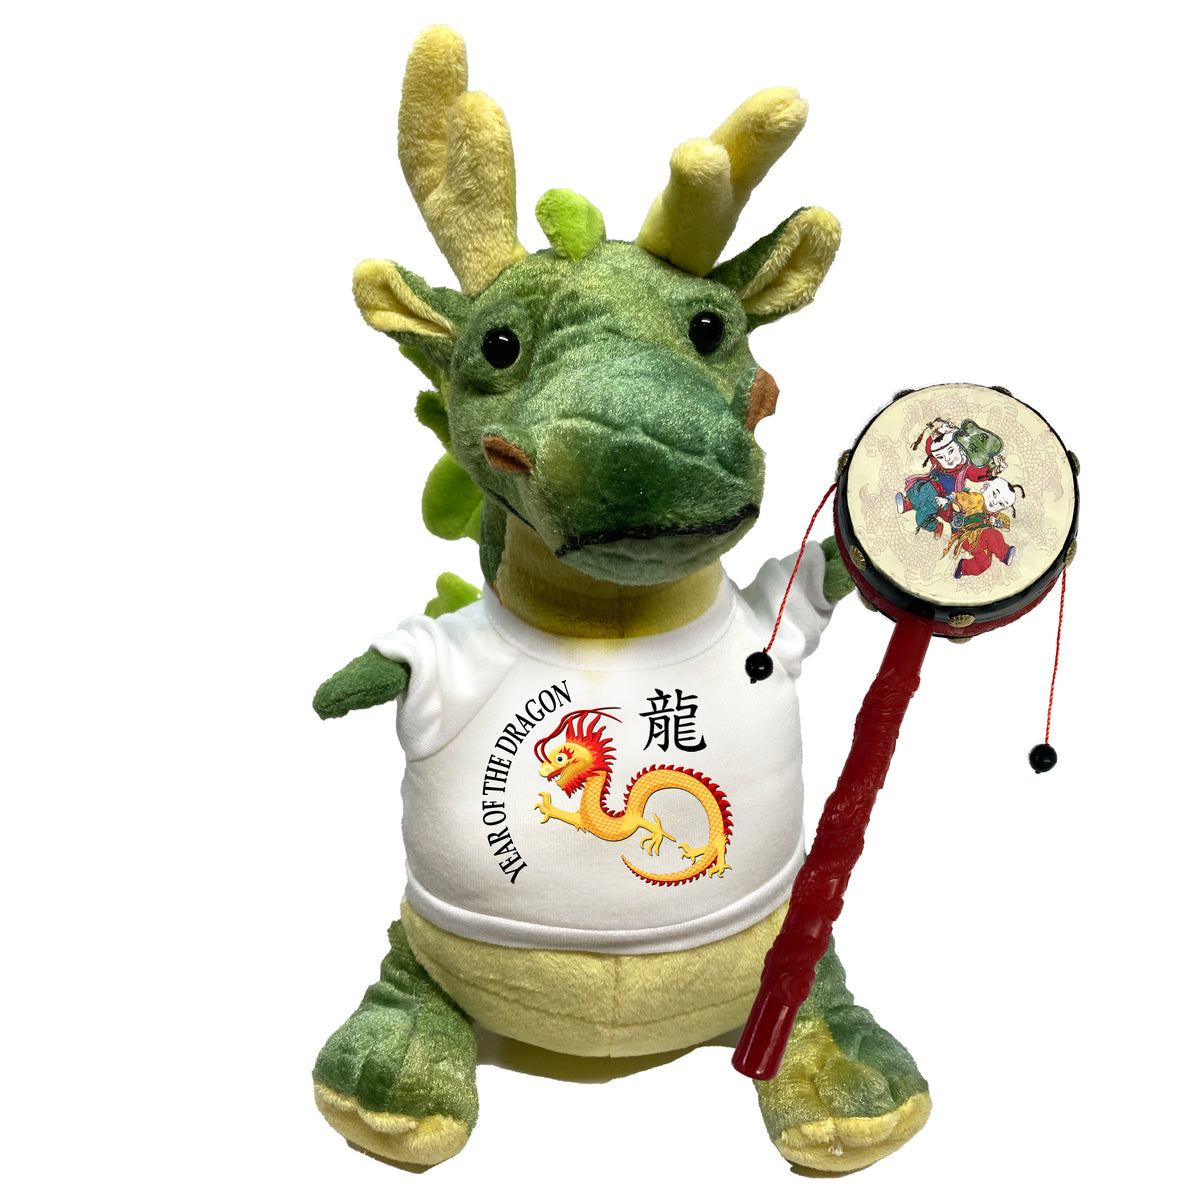 Year of the Dragon  Chinese Zodiac Stuffed Animal - Small 11" Green Dragon with mini drum noisemaker